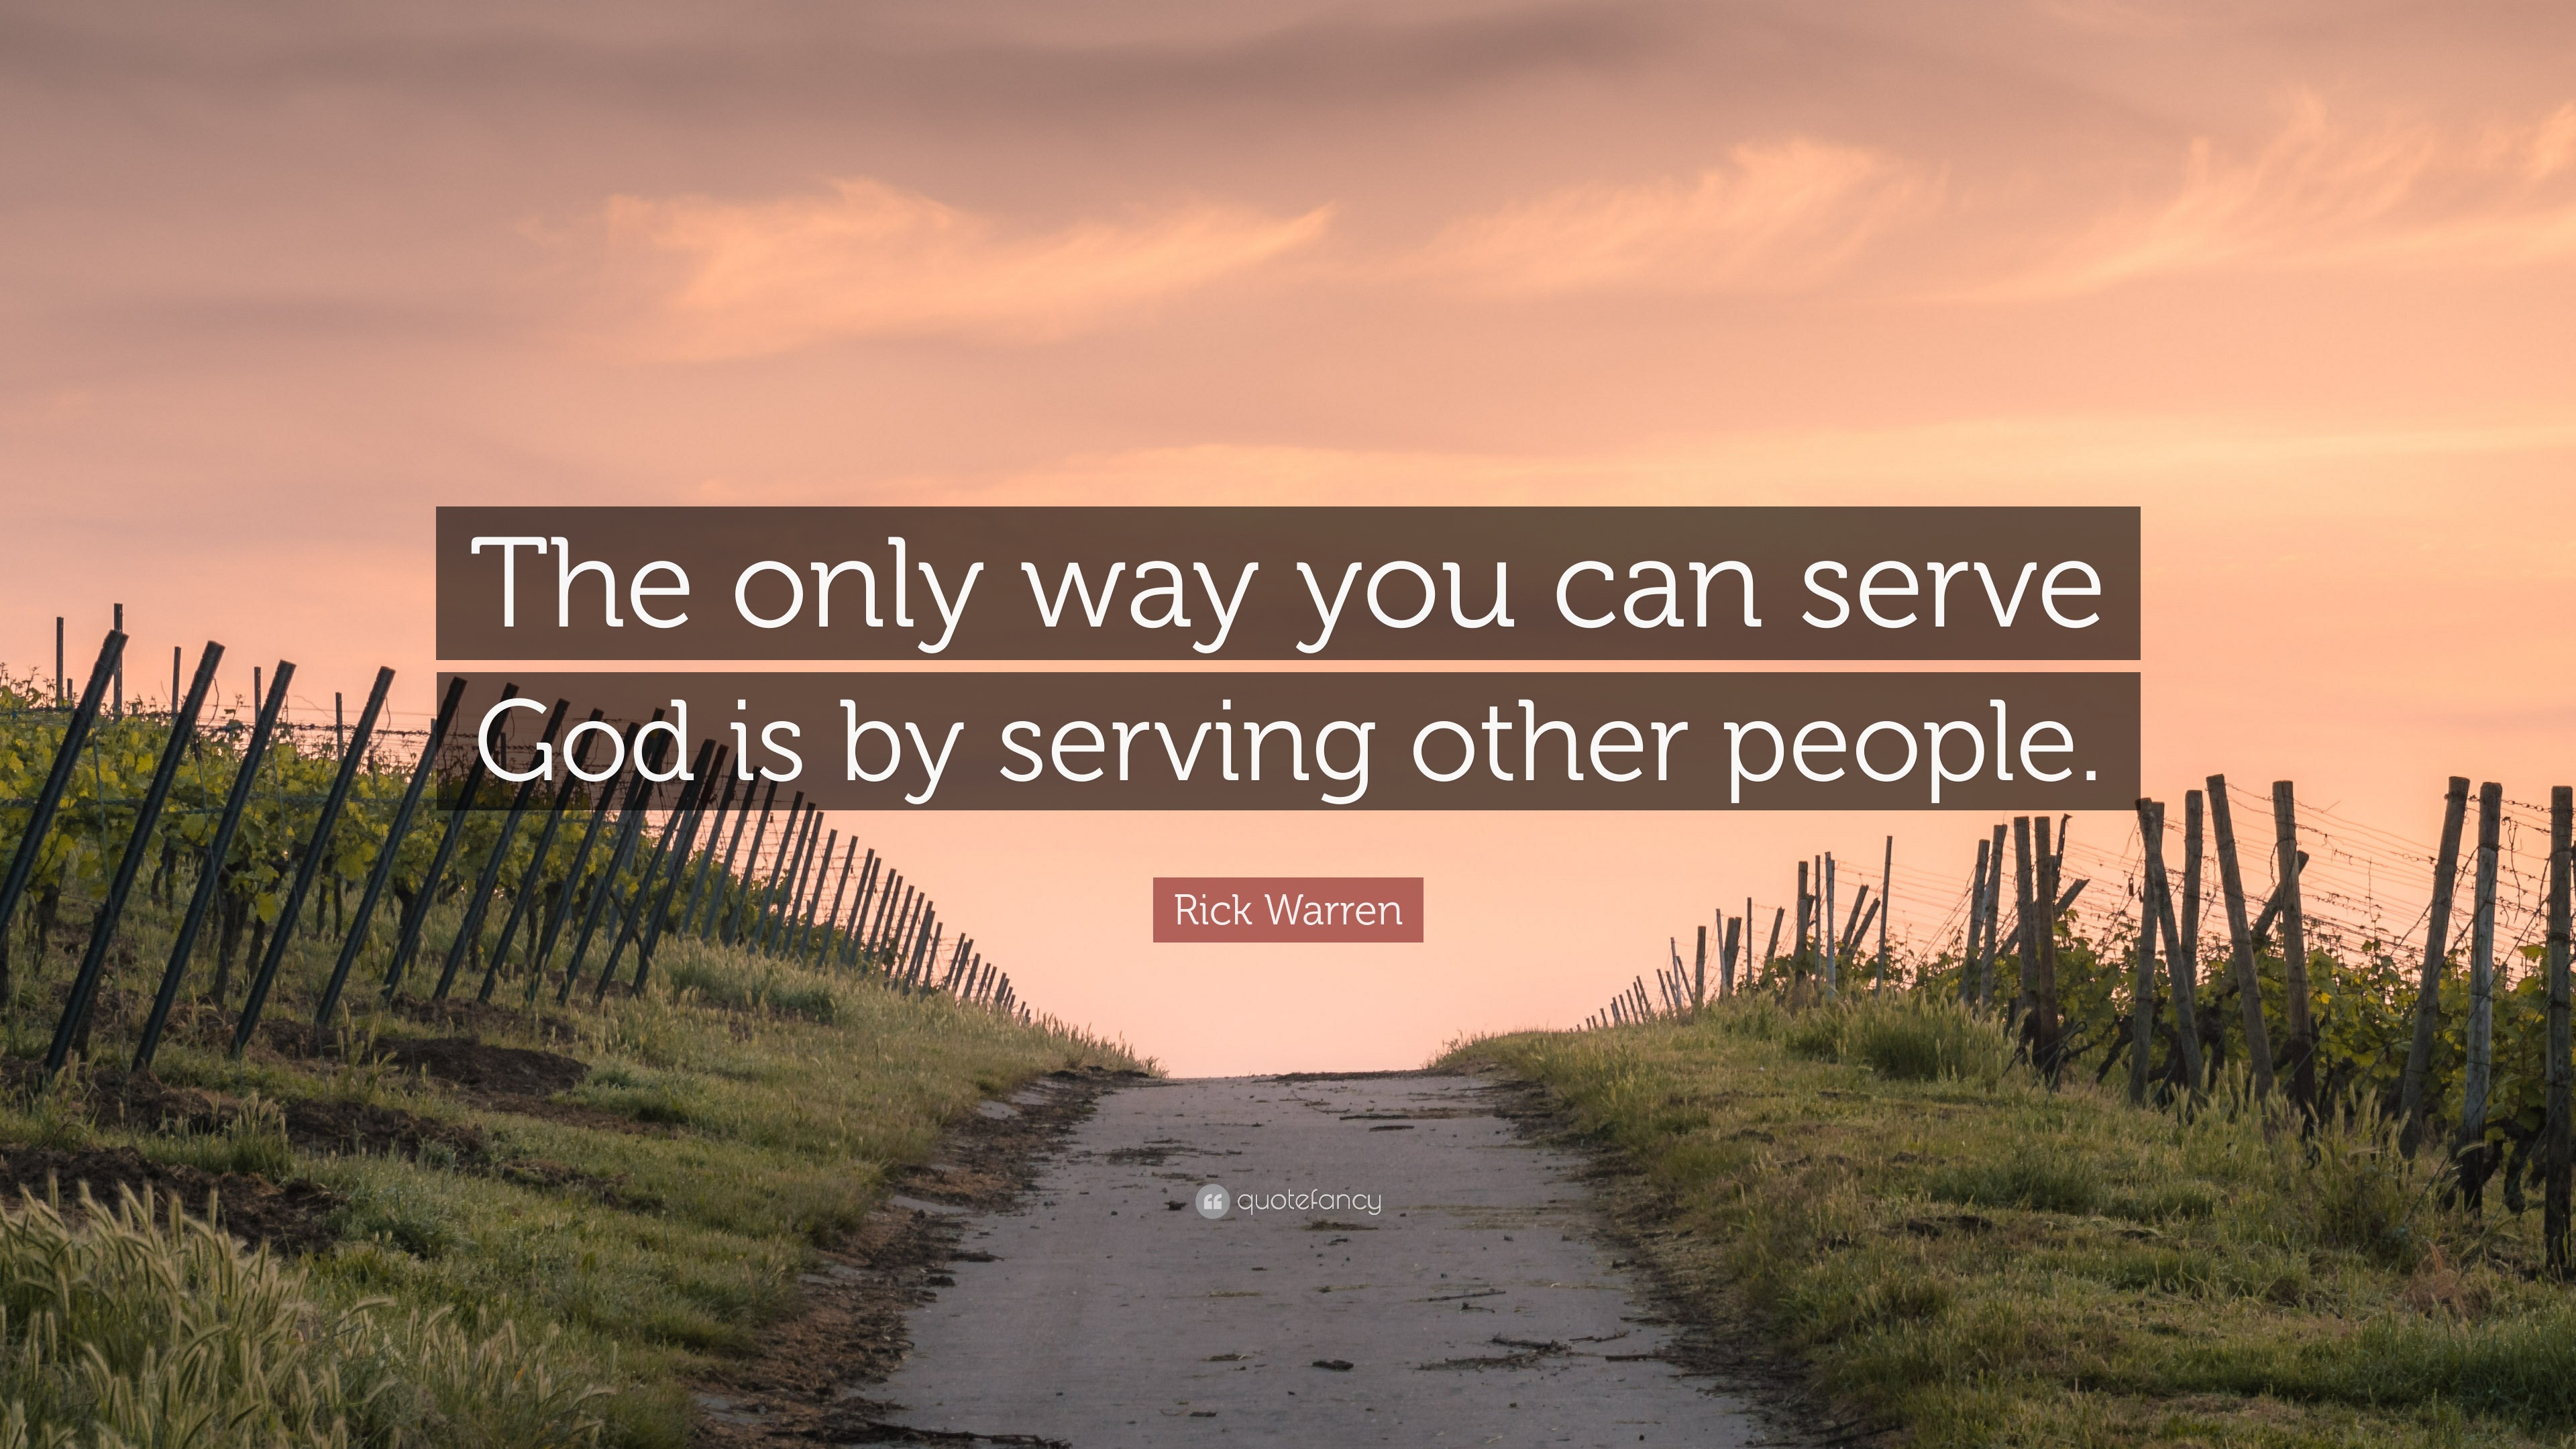 Serve the people